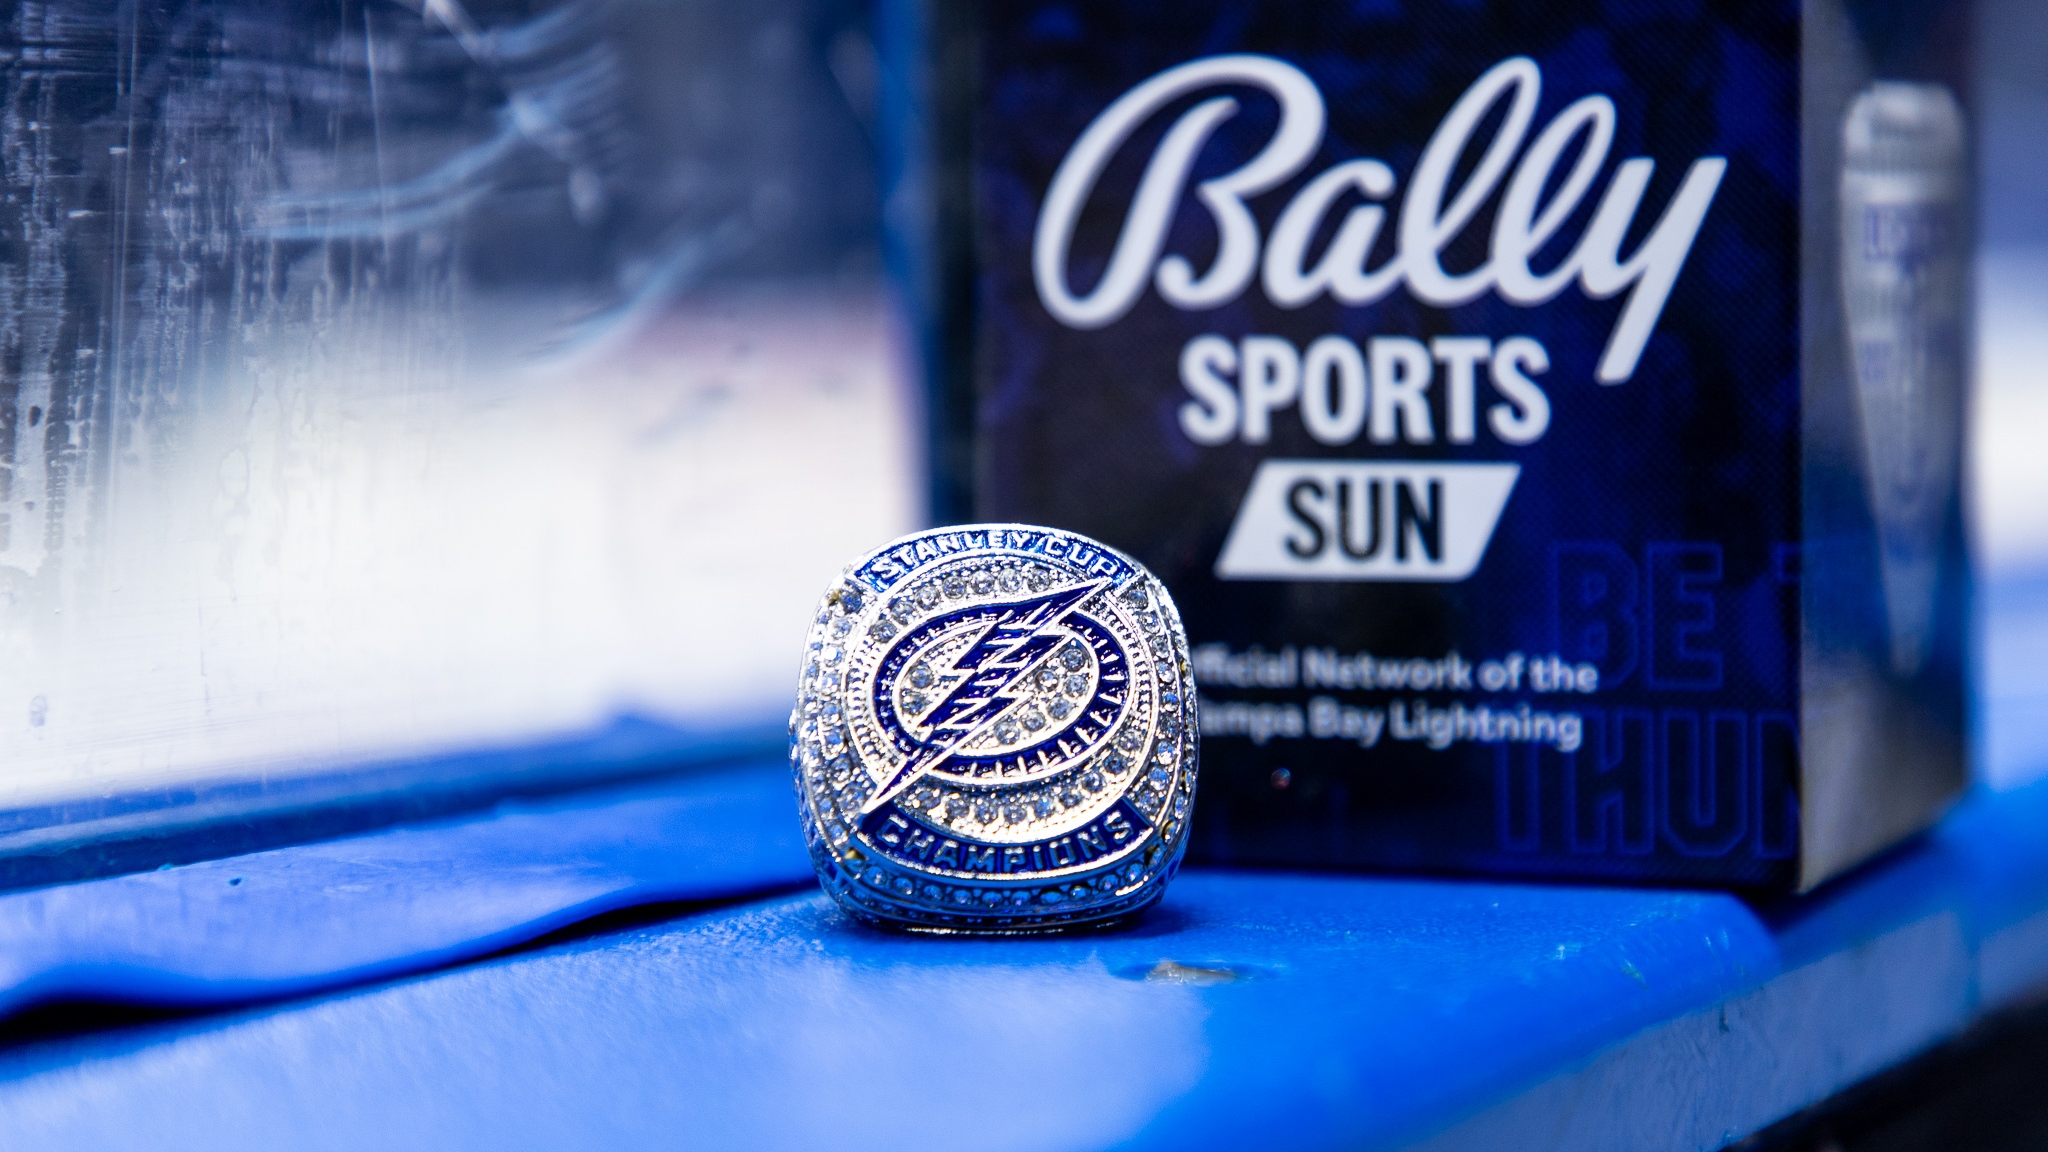 How the Lightning created the most elaborate Stanley Cup ring of